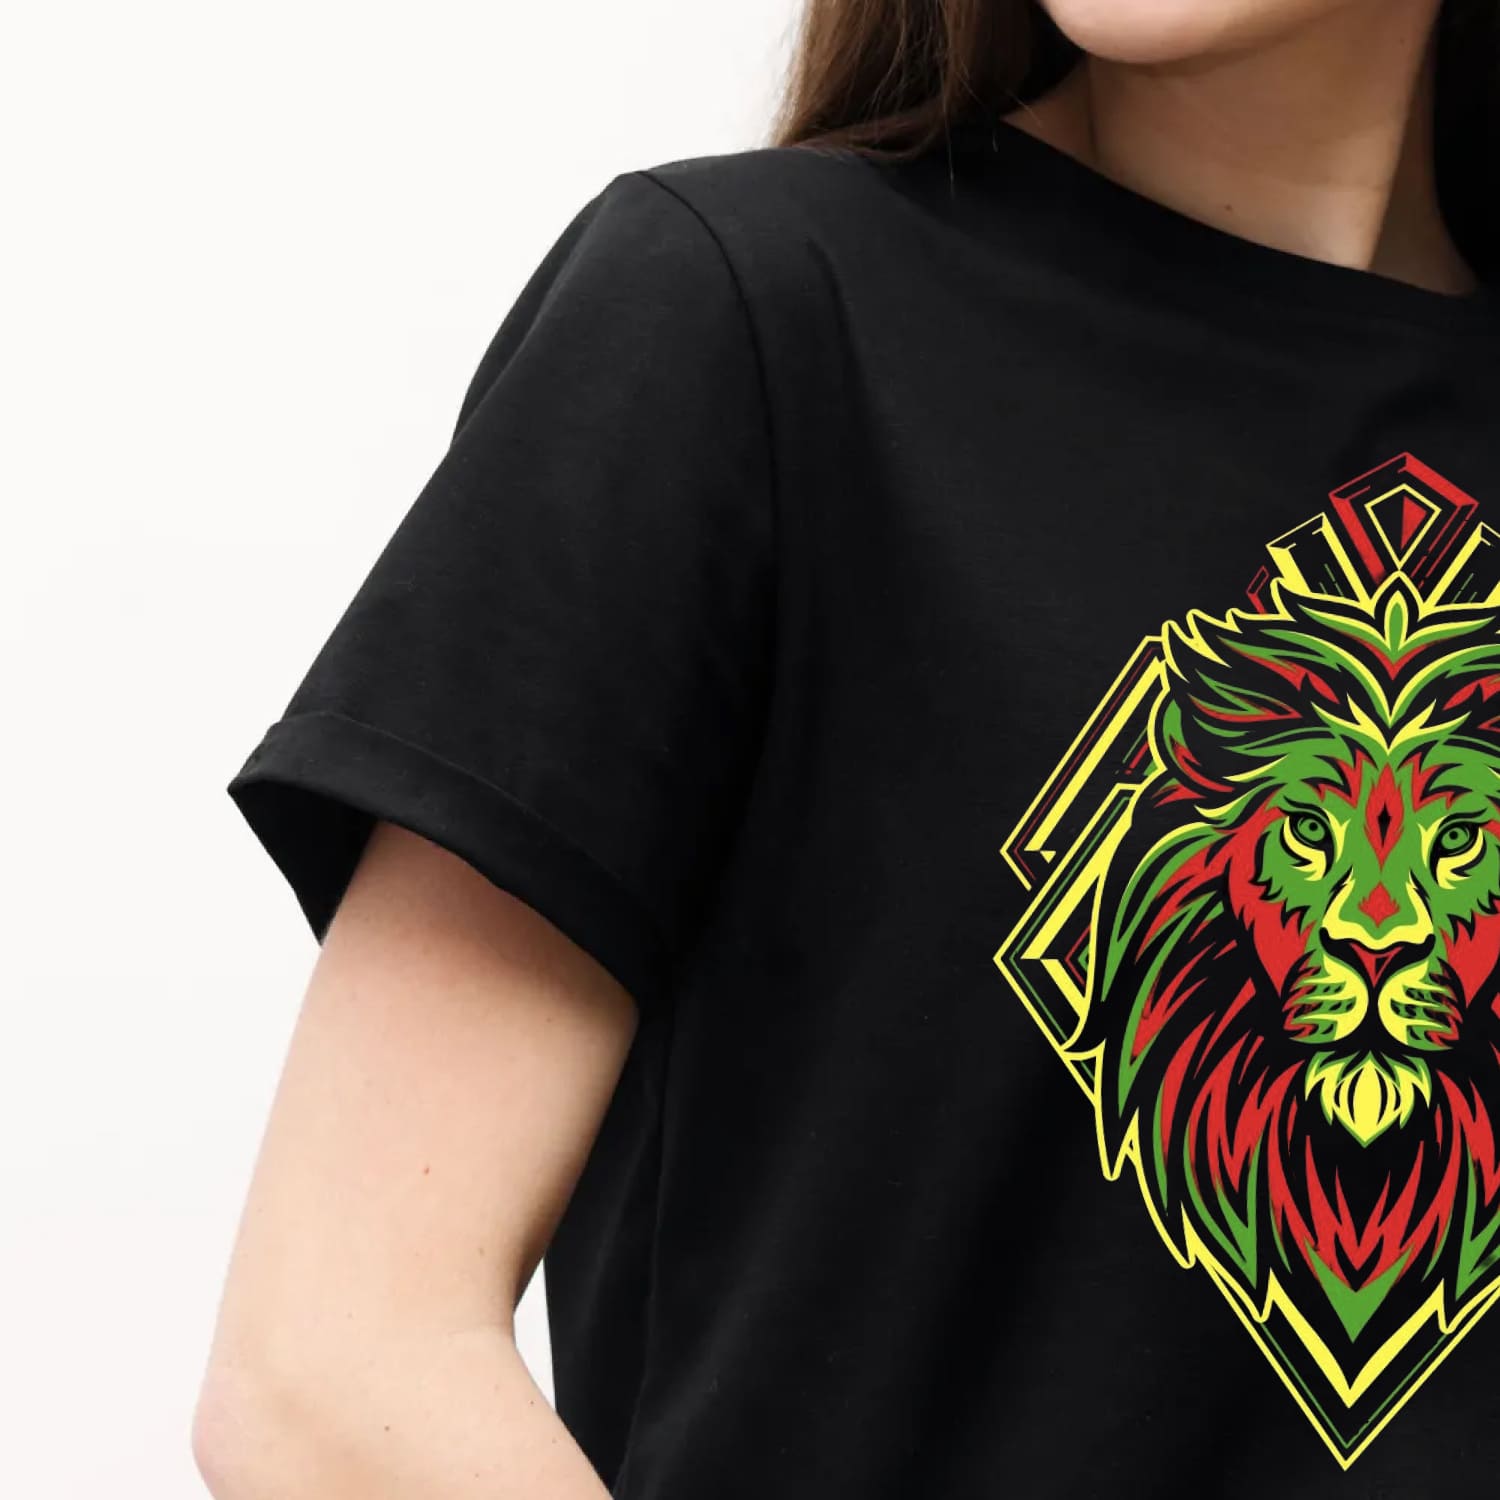 Lion Head with Geometric Badge cover.